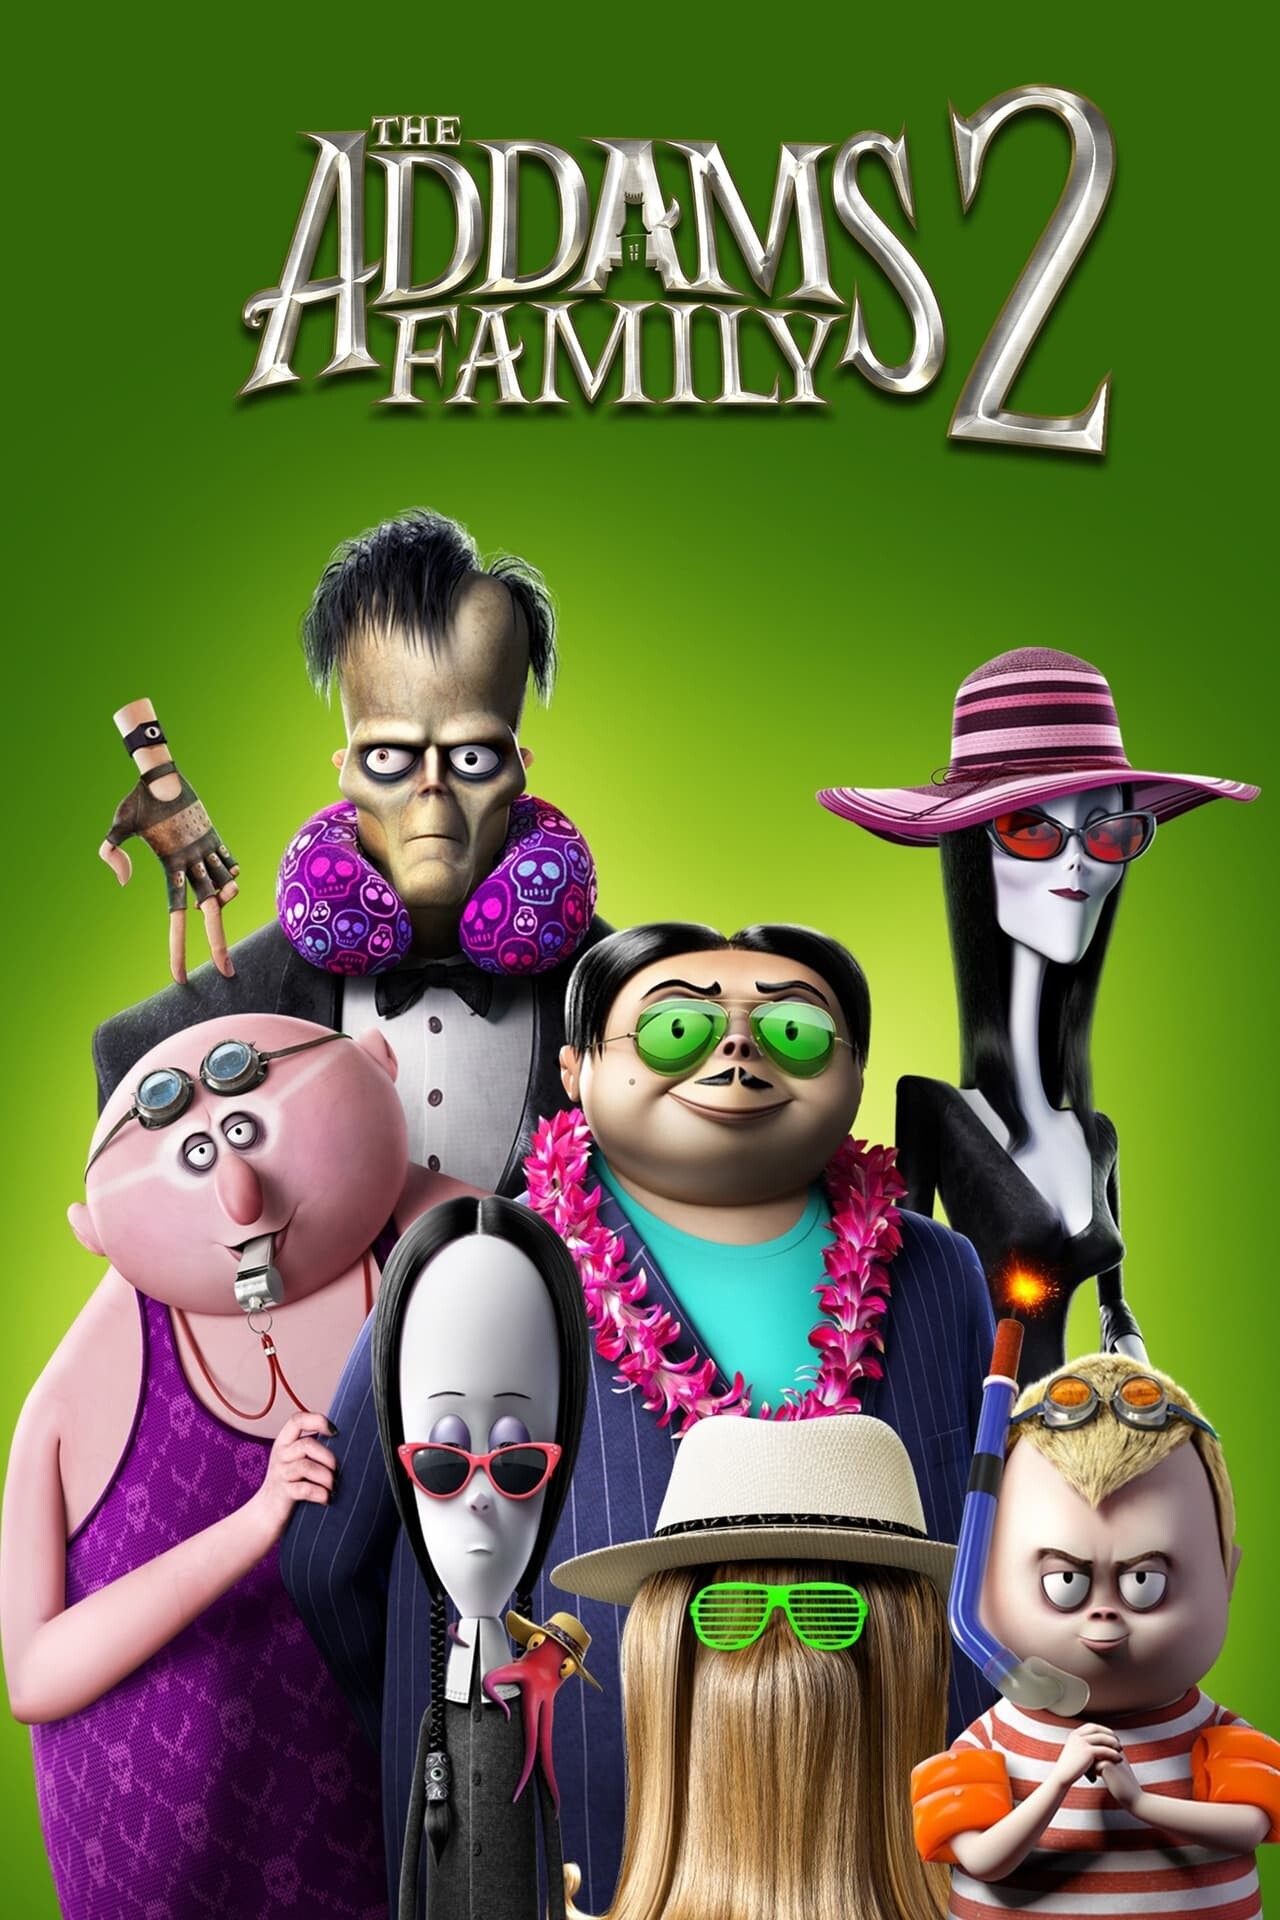 The Addams Family 2: Spooky family, The animated comedy sequel, Adventure across America. 1280x1920 HD Wallpaper.